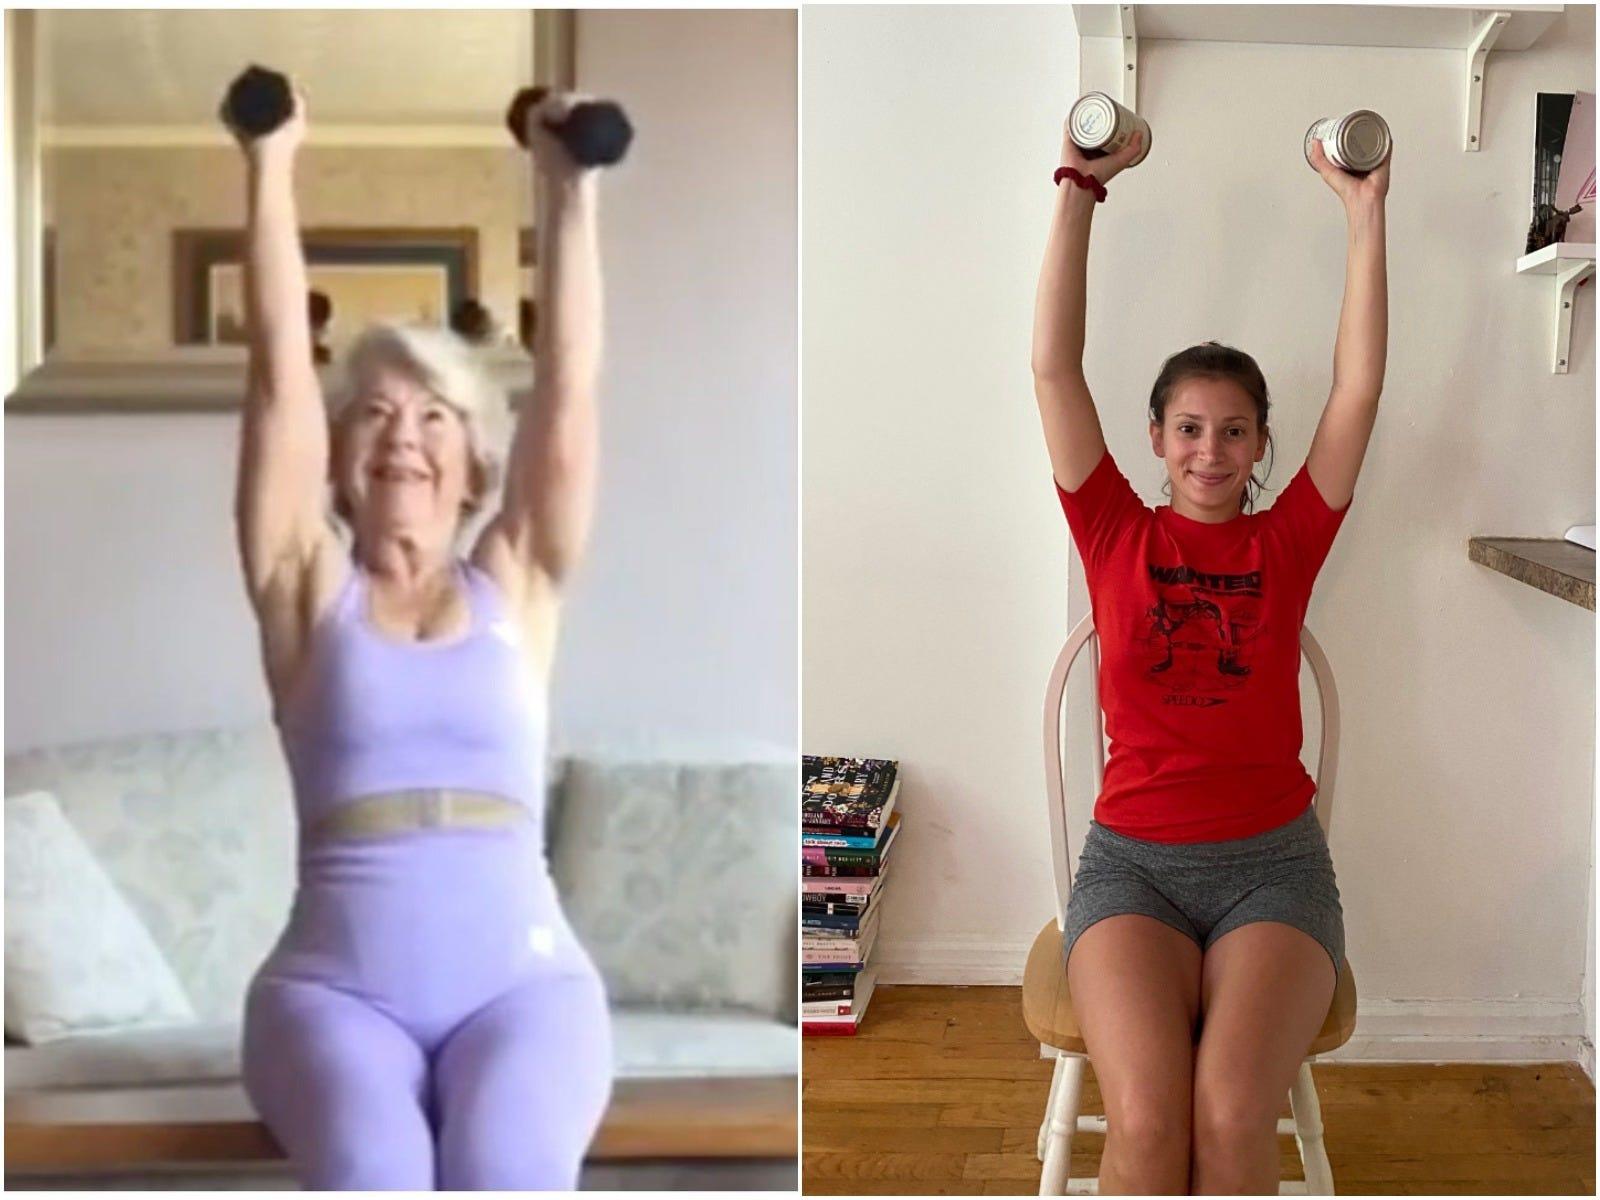 I Tried A 74 Year Old Fitness Influencer S Daily Workout For A Week And Realized I M Not In As